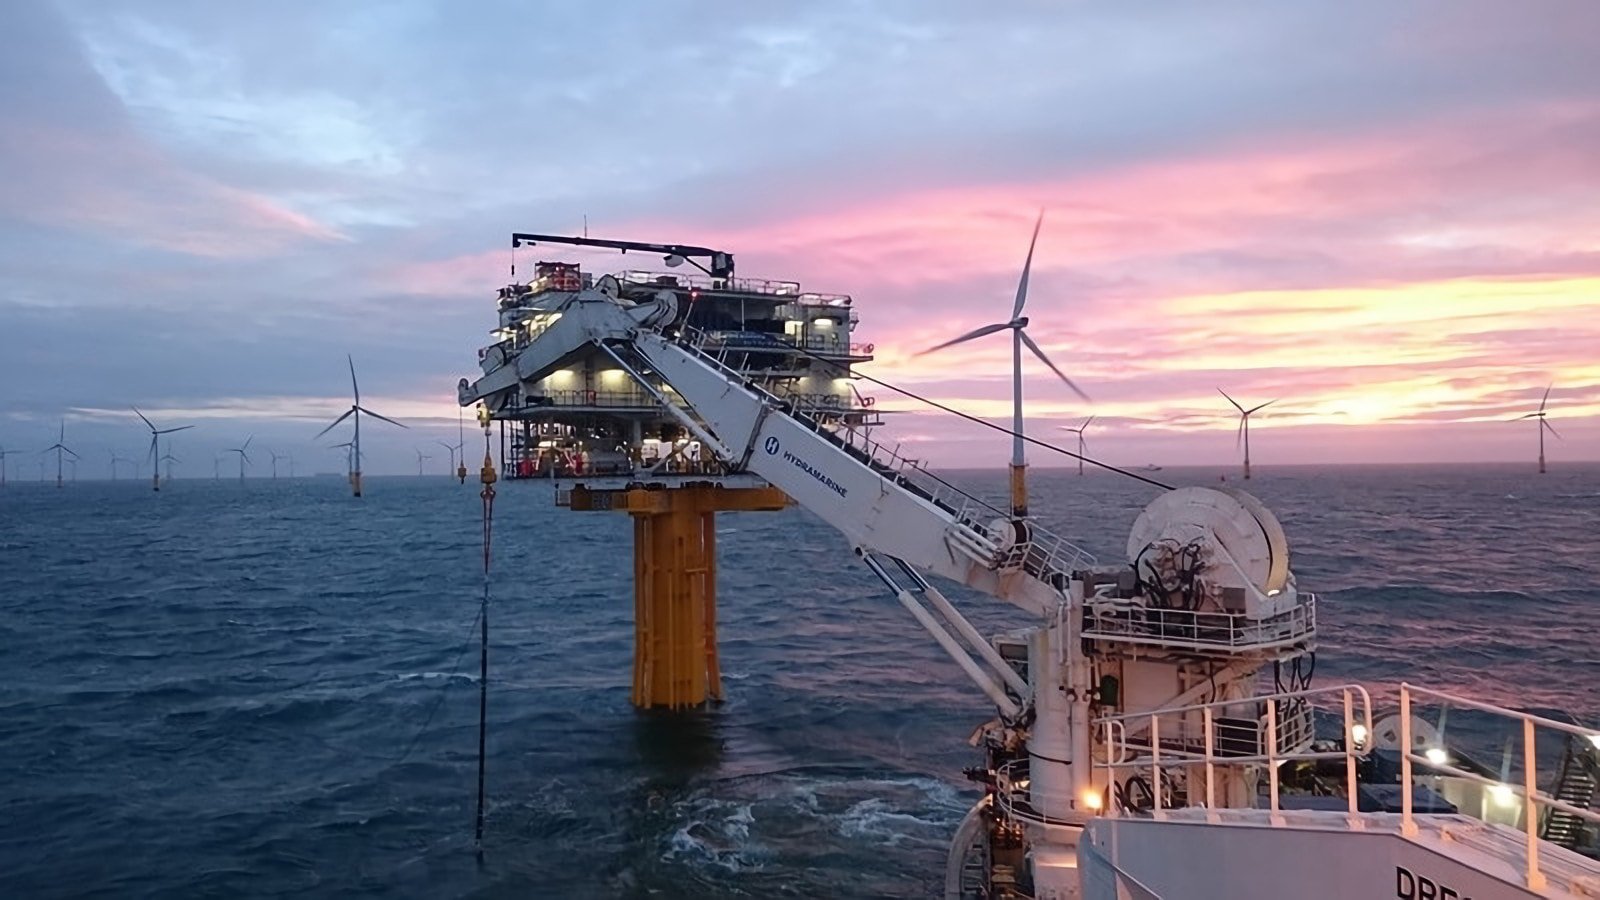 New North Sea assignments for DeepOcean with offshore wind and oil & gas players